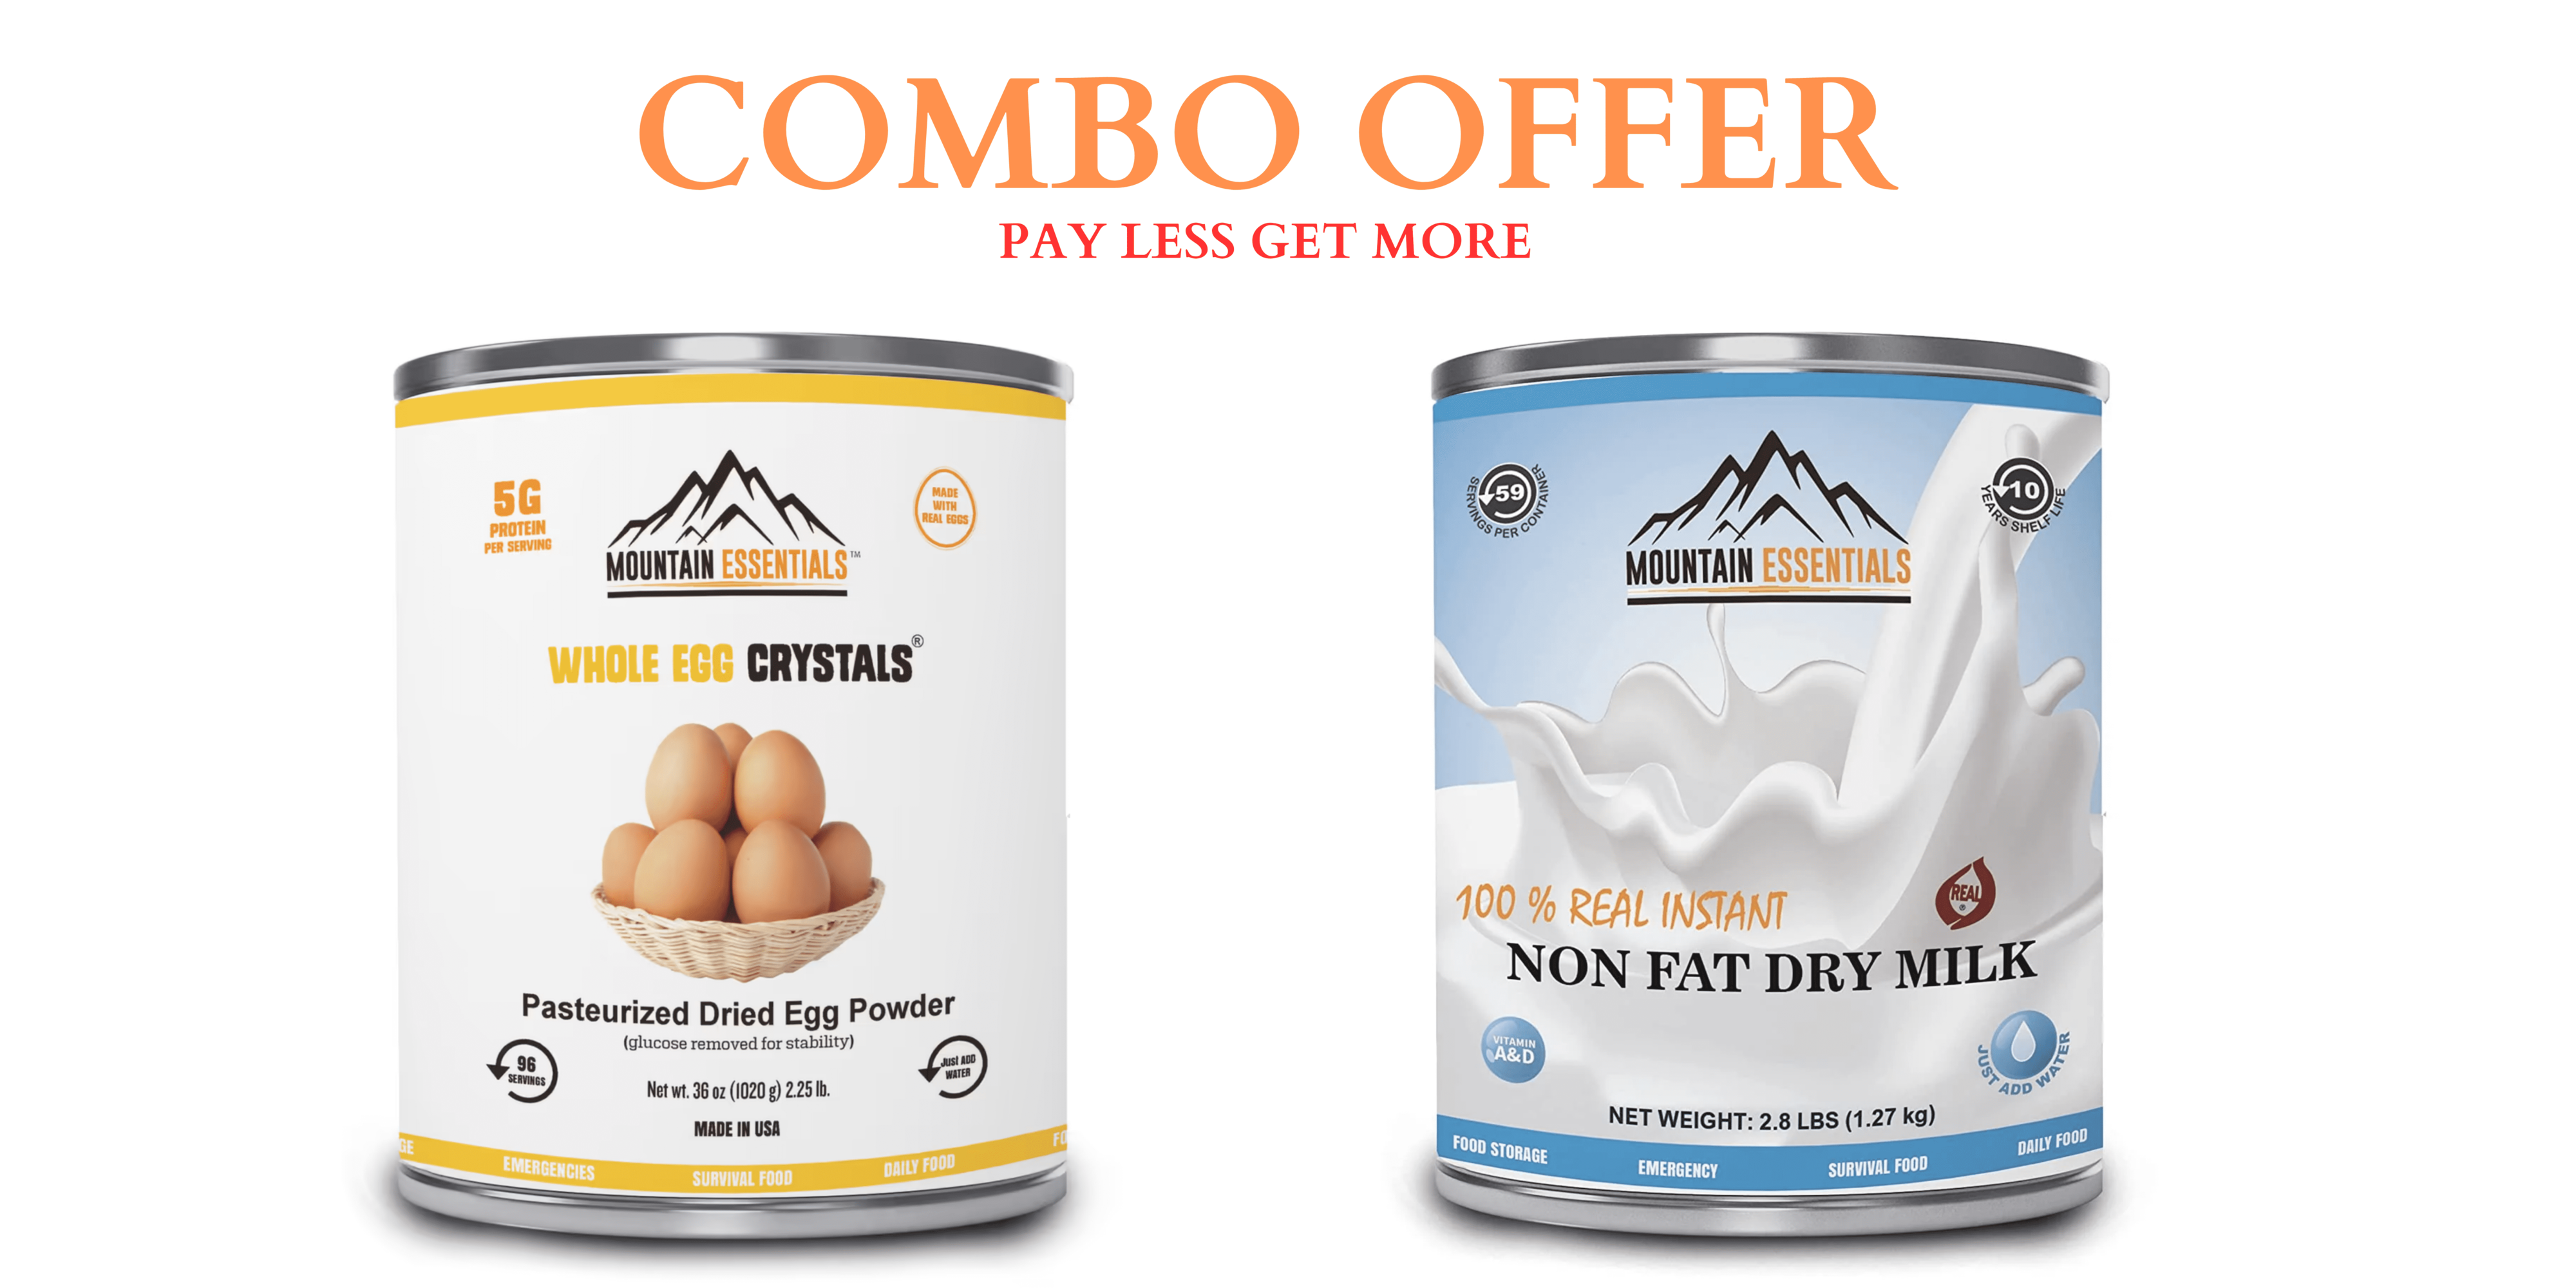 Image of Combo offer - Mountain Essentials Powdered Eggs and Non Fat Dry Milk